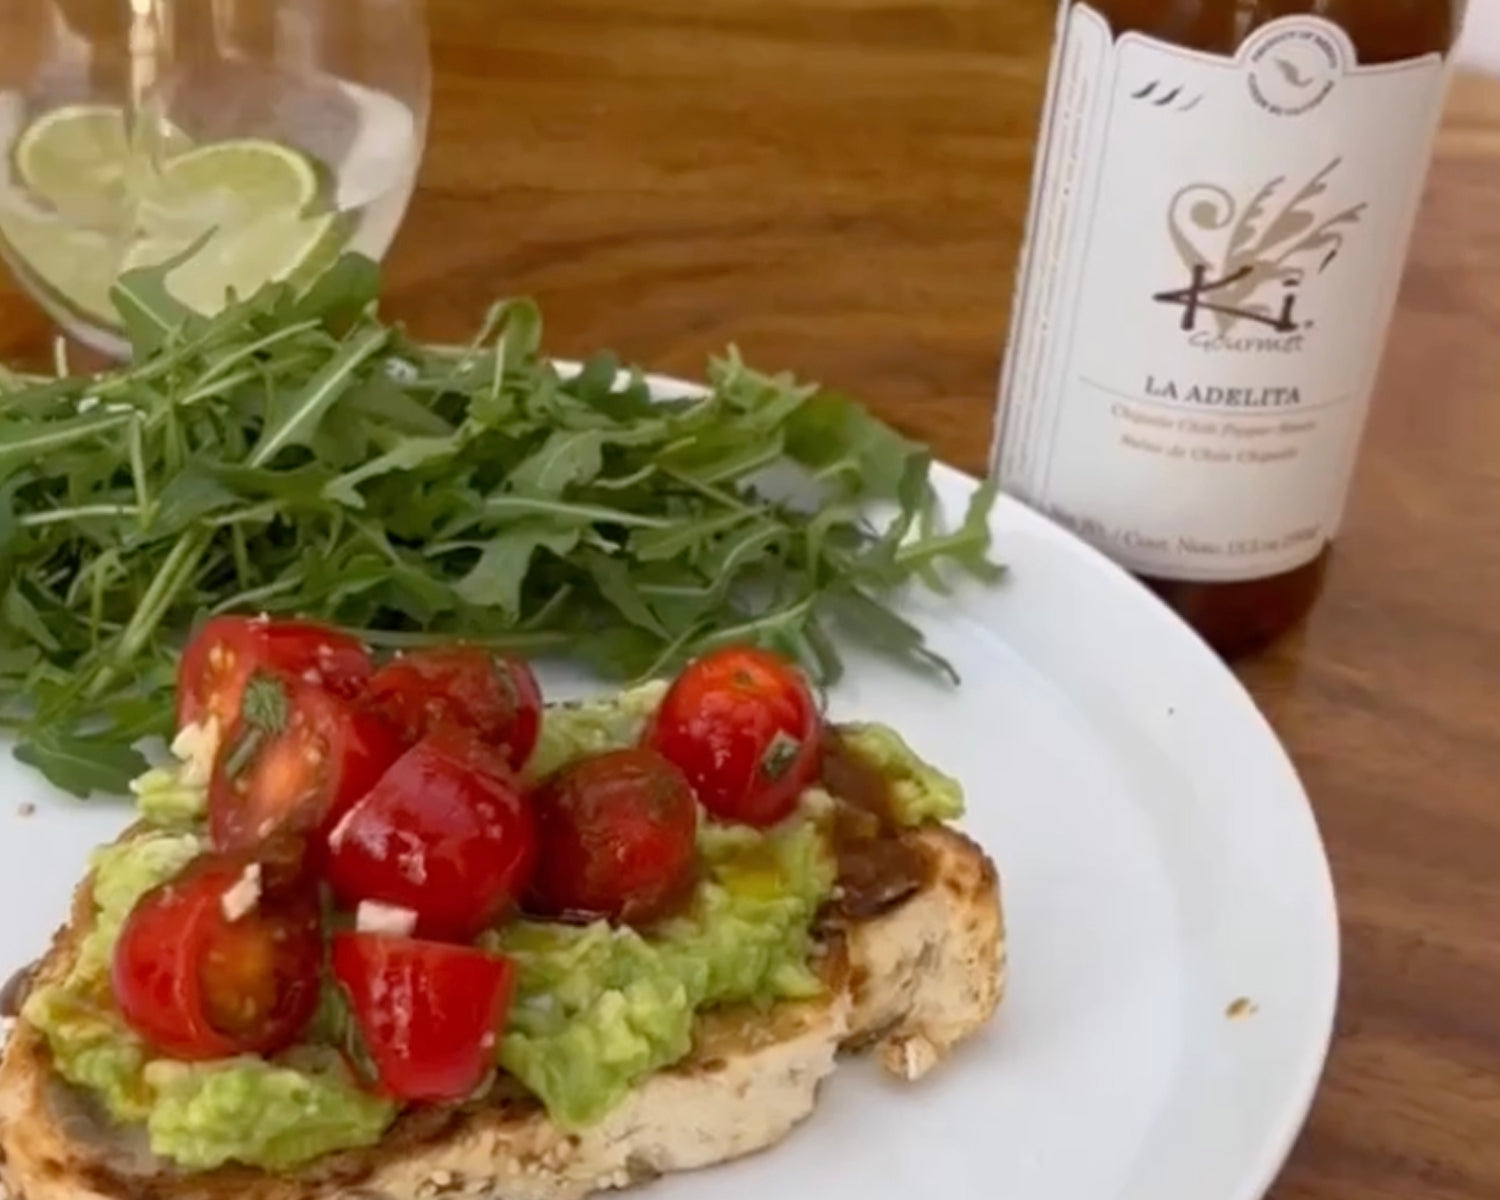 Smashed Avo on Toast with Chipotle Chili Sauce - El Cielo Shop